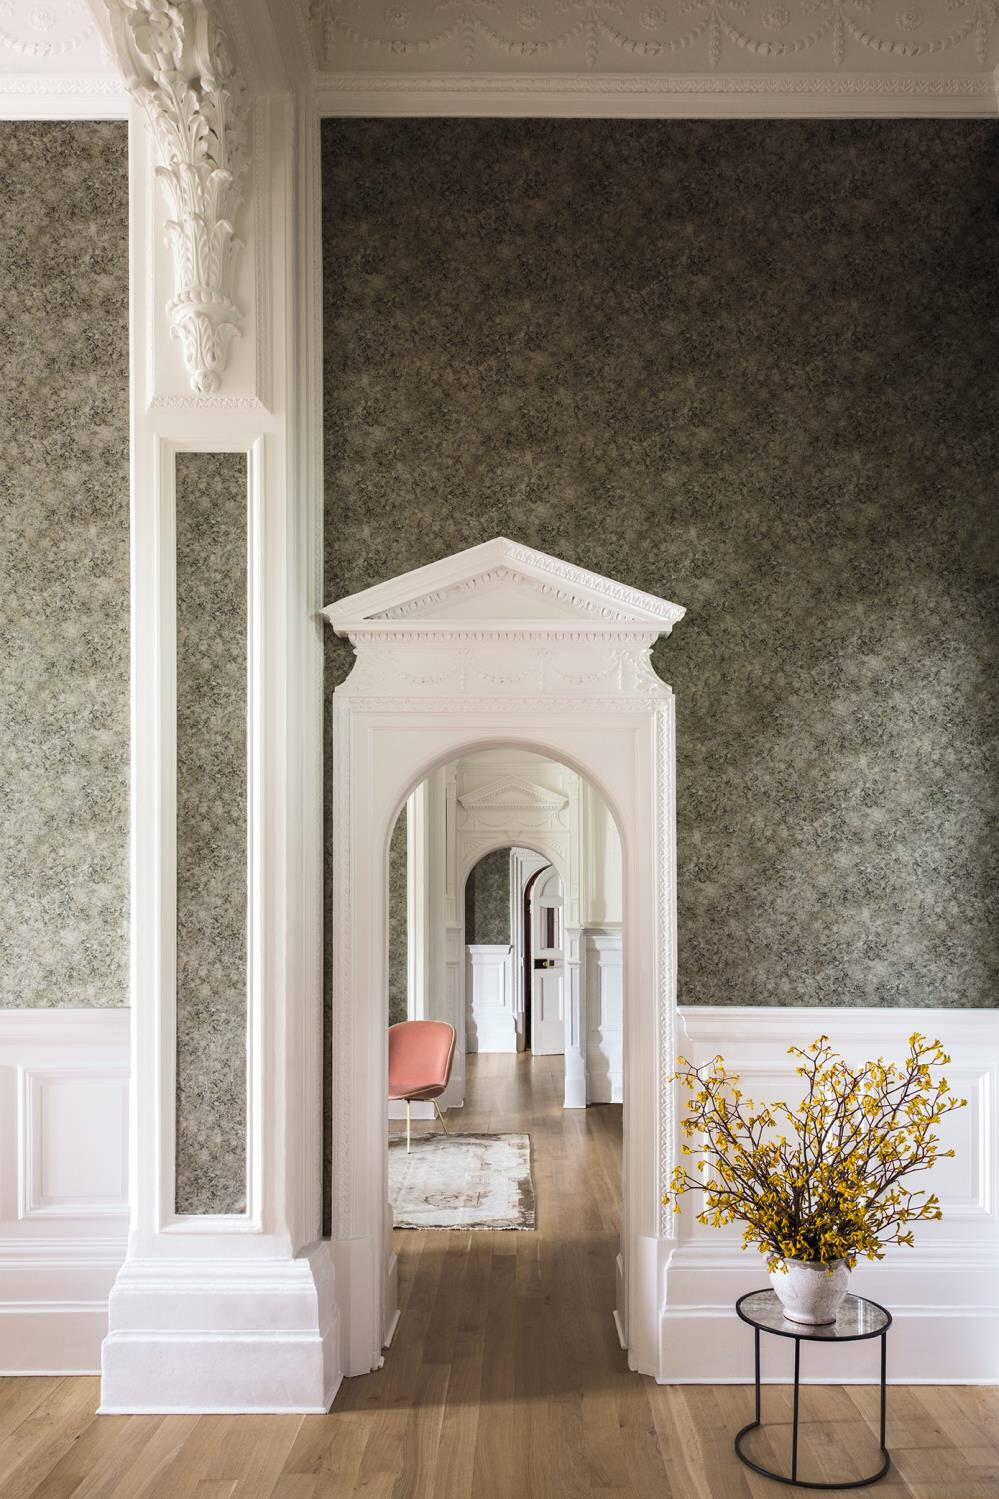 Shades of Soft Gold, Warm Gilver, Taupe, and Moss add to its understated elegance.